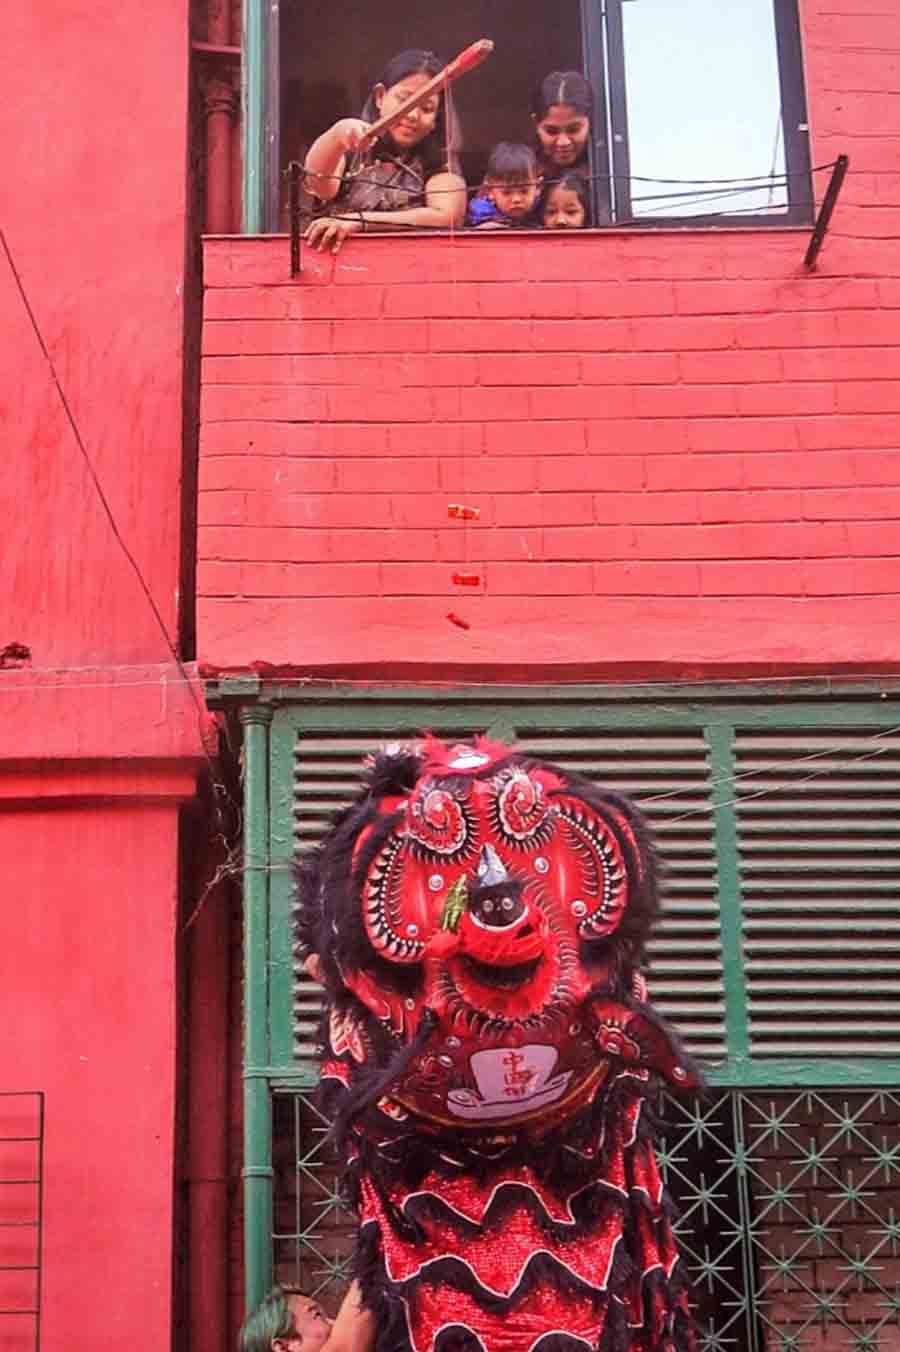 A young lady at Bow Barracks shows off her skill in making the Dragon dance right from their window above the street